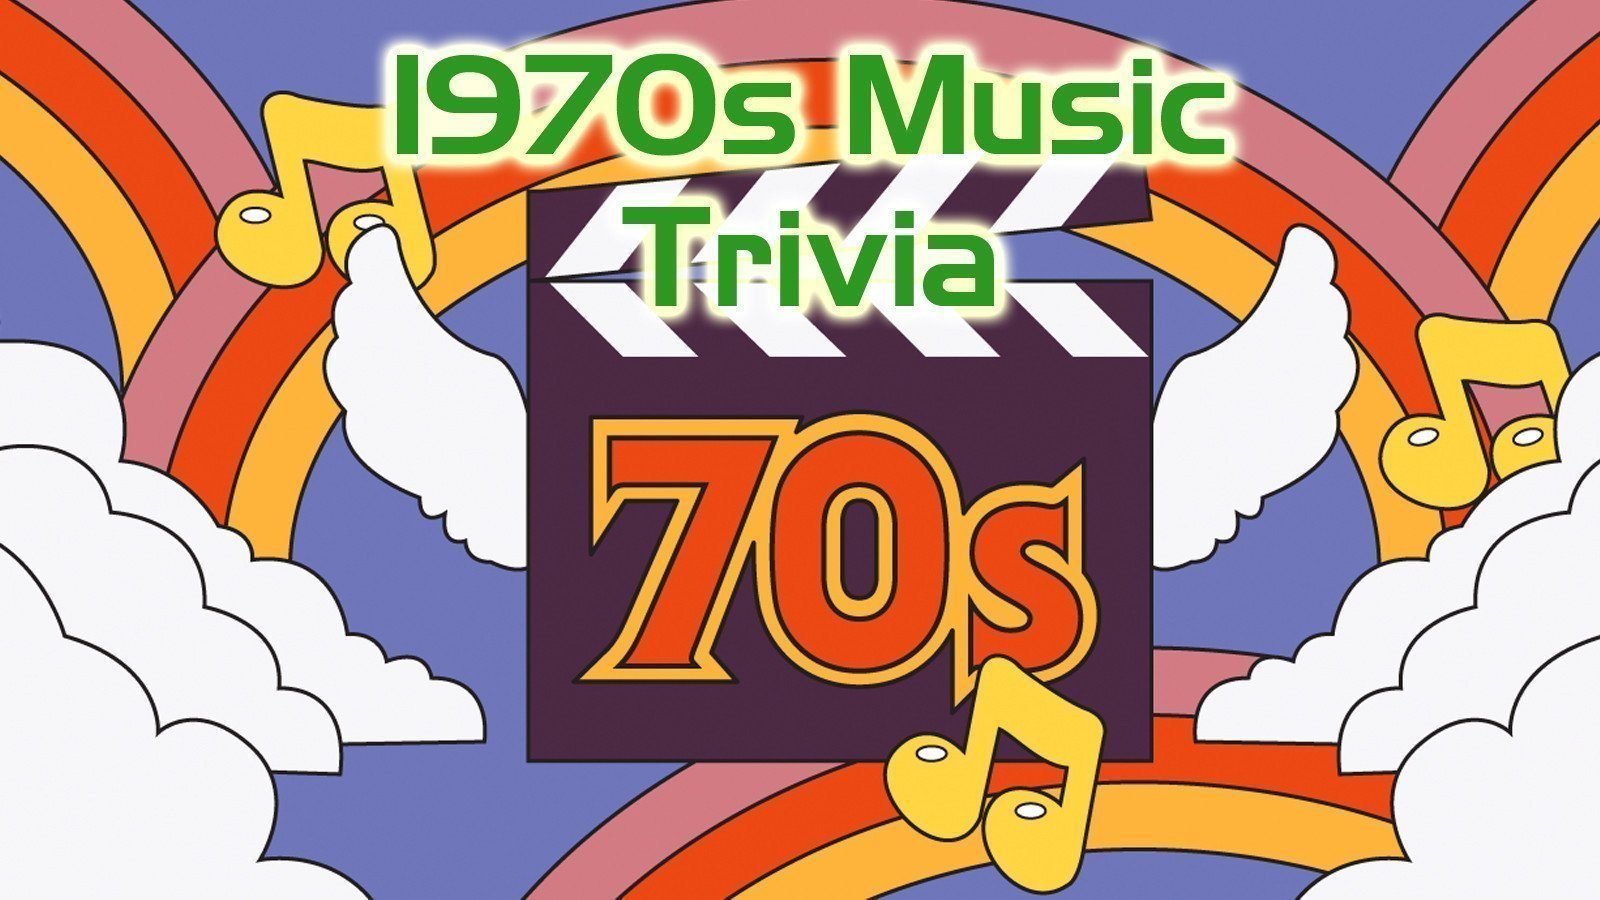 Free Trivia Night Questions - 1970s Music